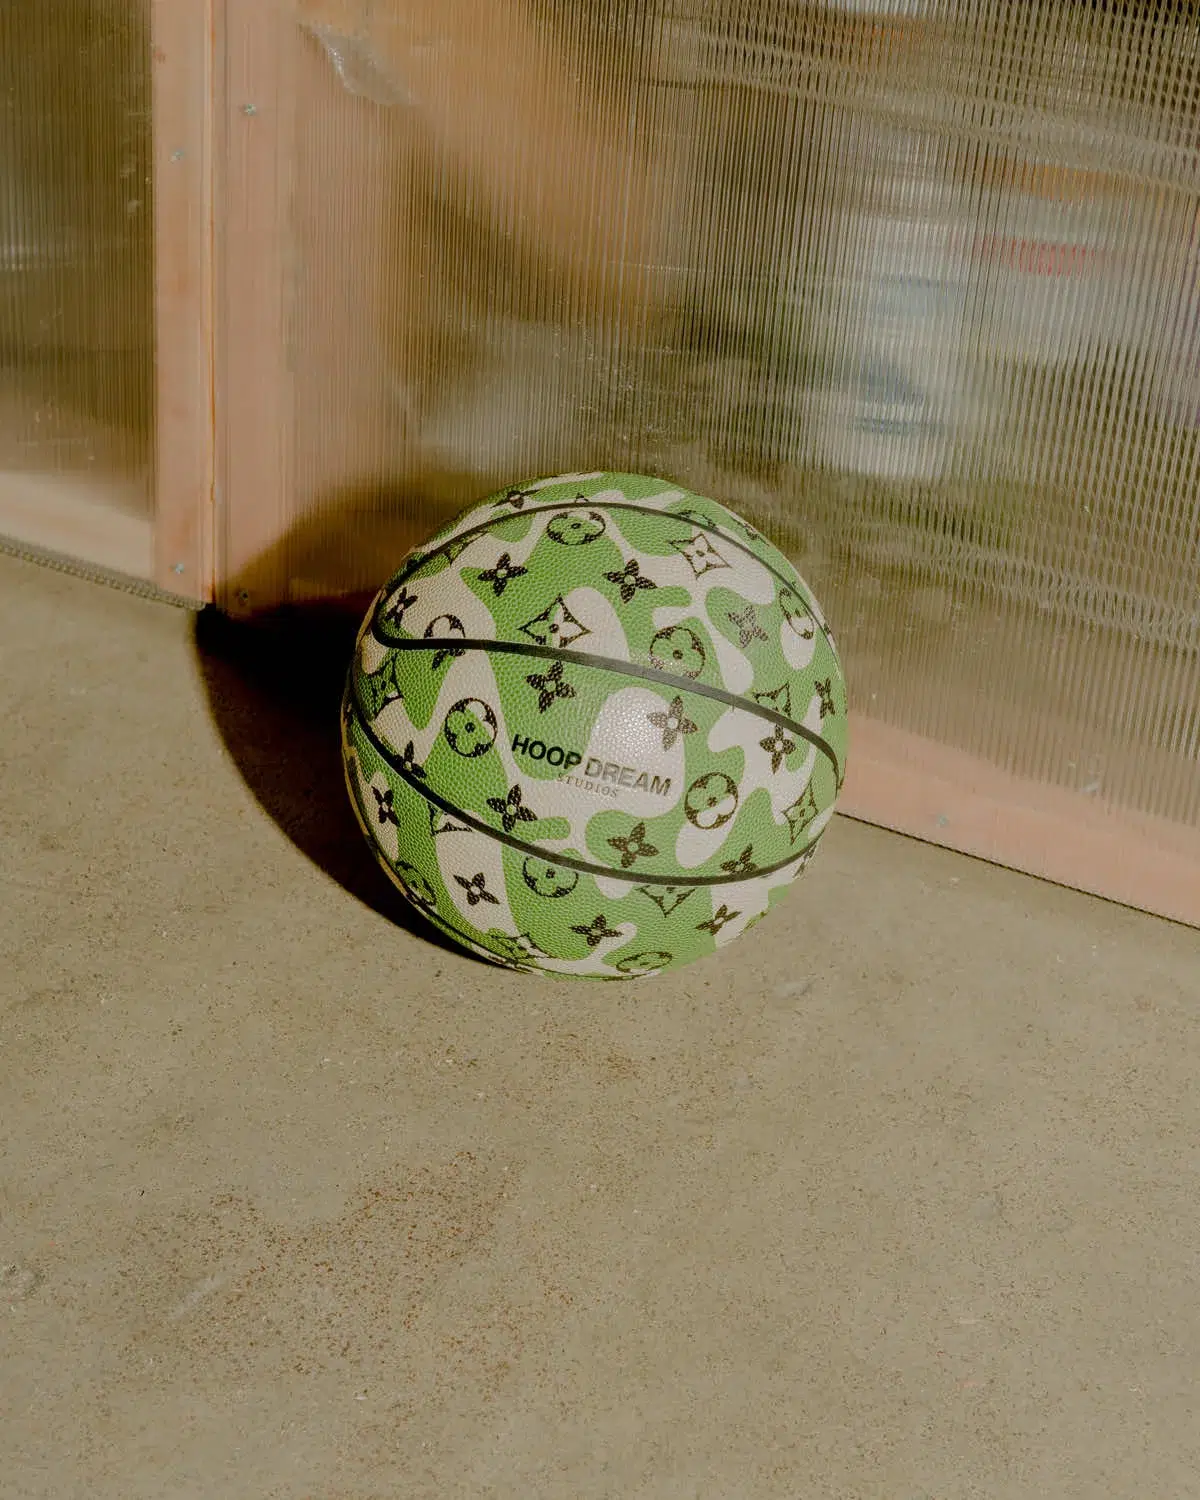 A LV Camo Ball resting in front of a window.